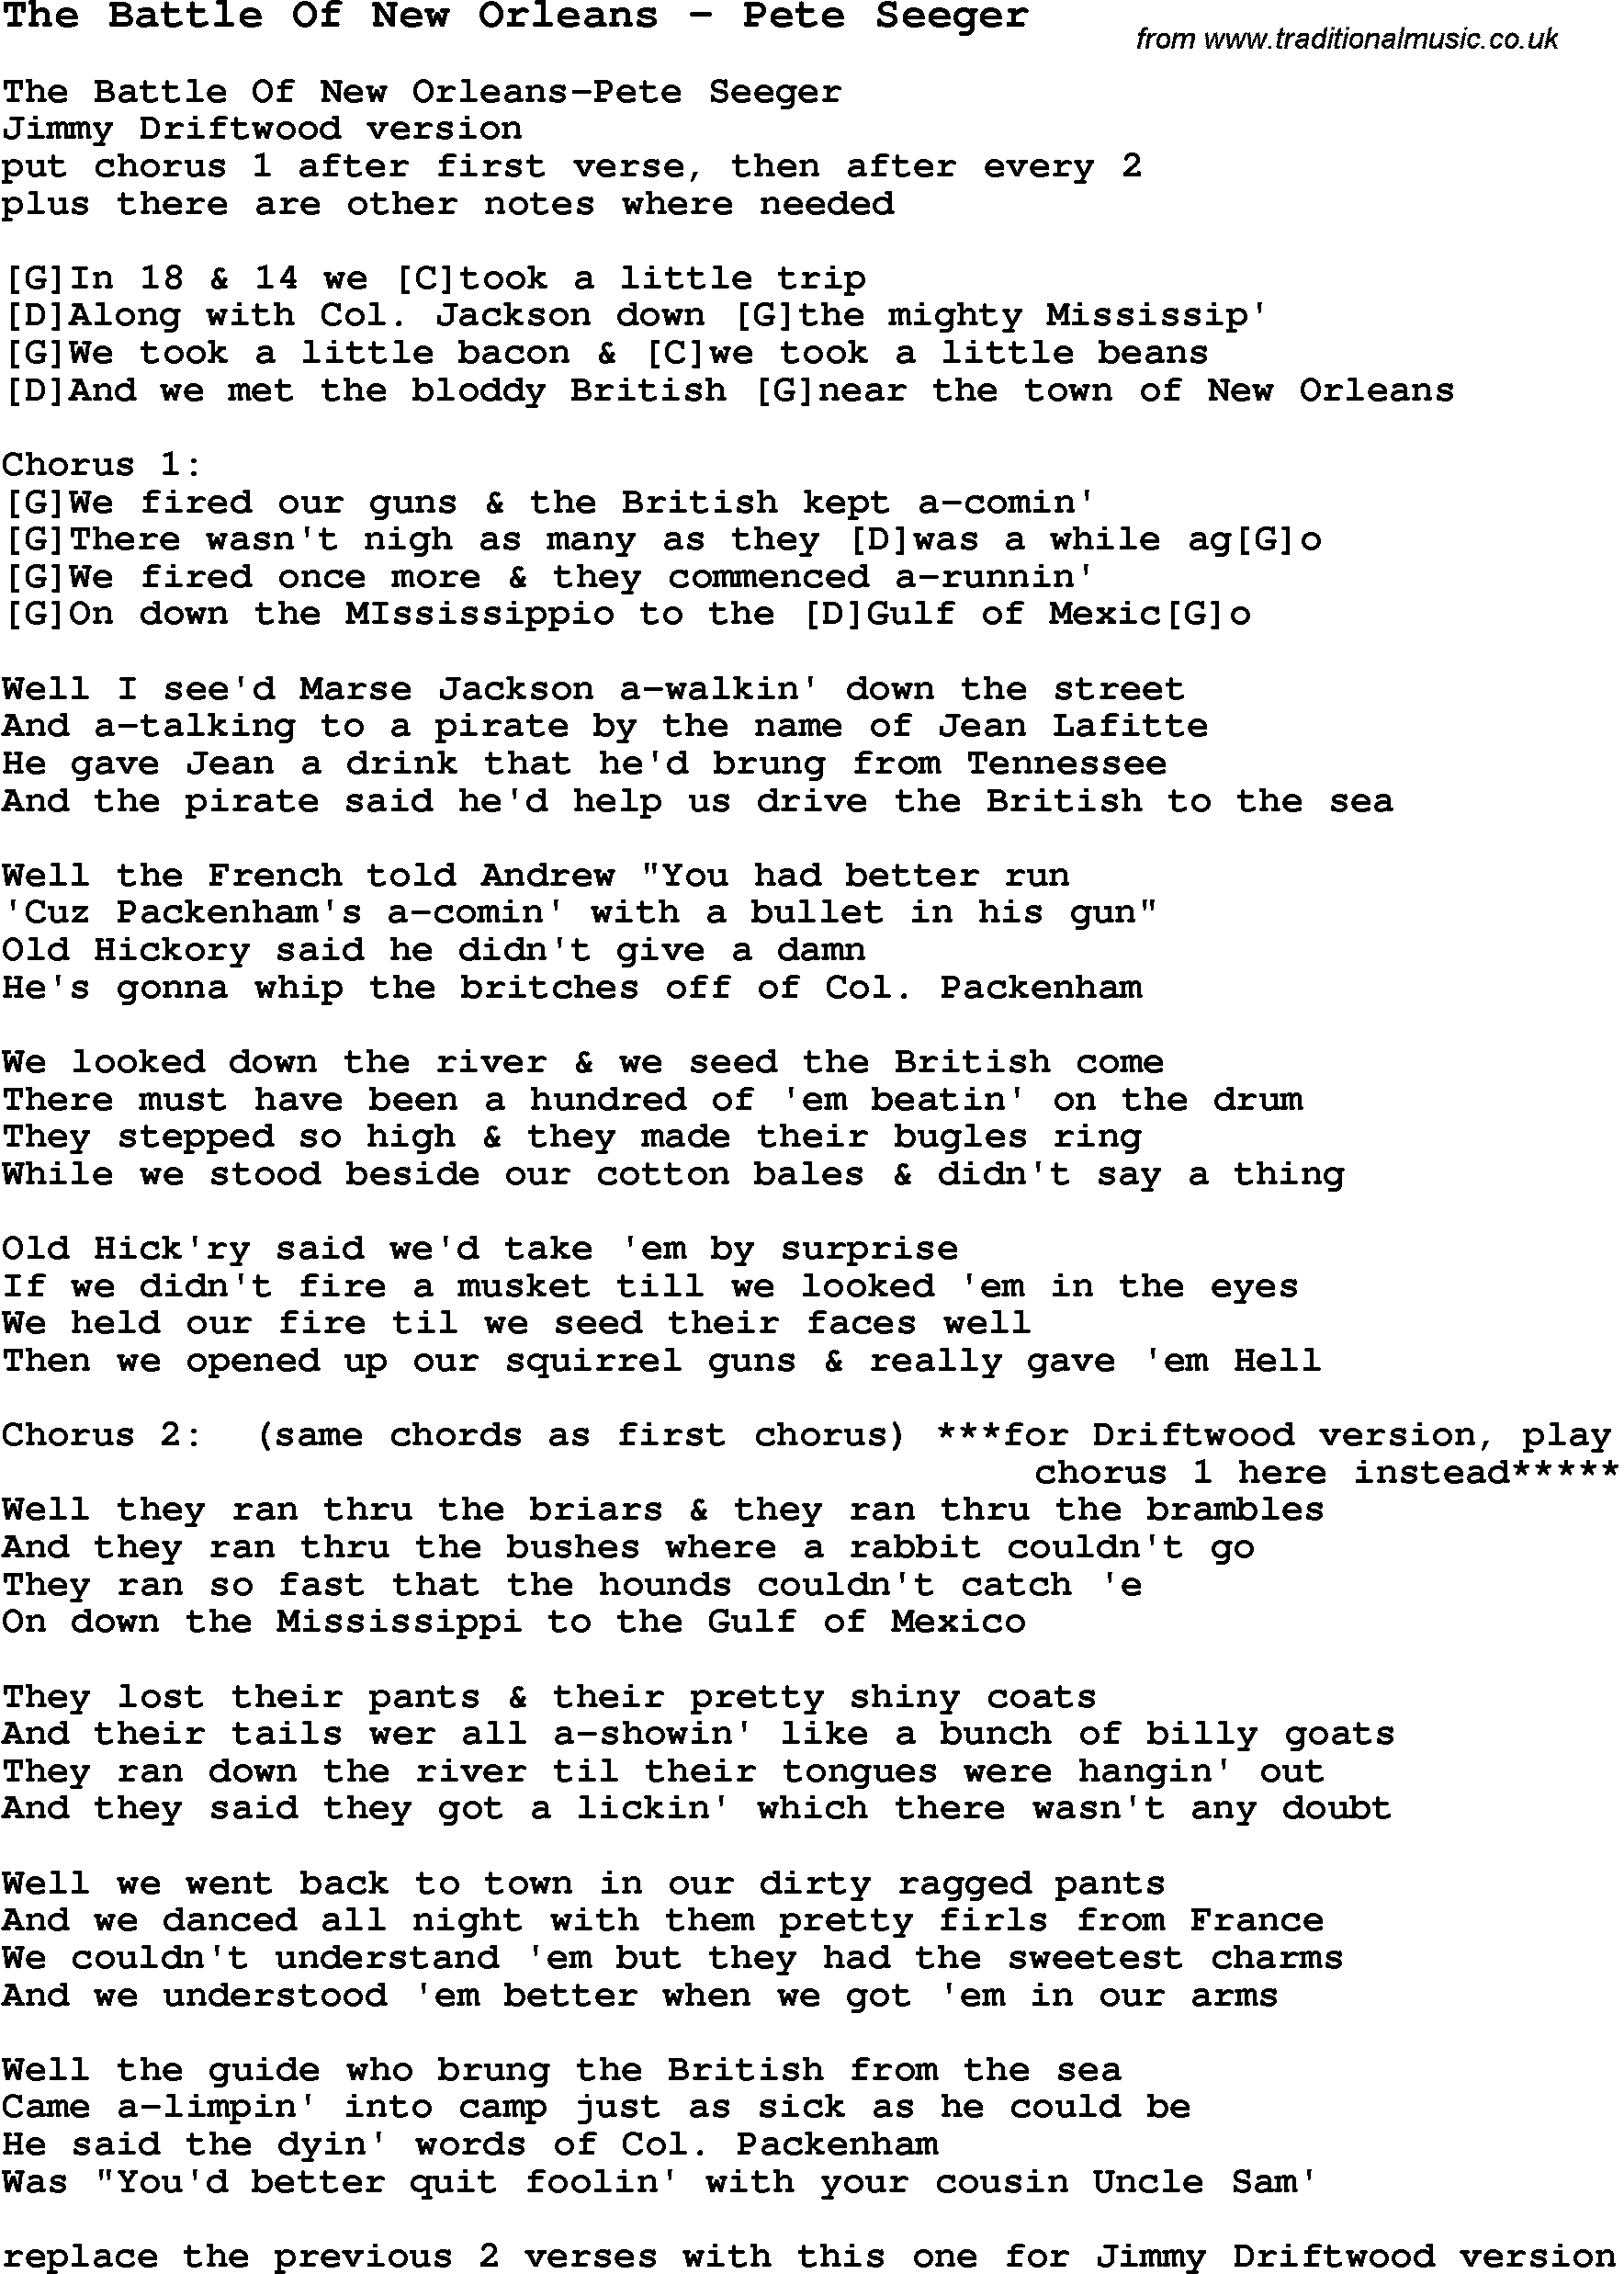 Traditional Song The Battle Of New Orleans - Pete Seeger with Chords, Tabs and Lyrics